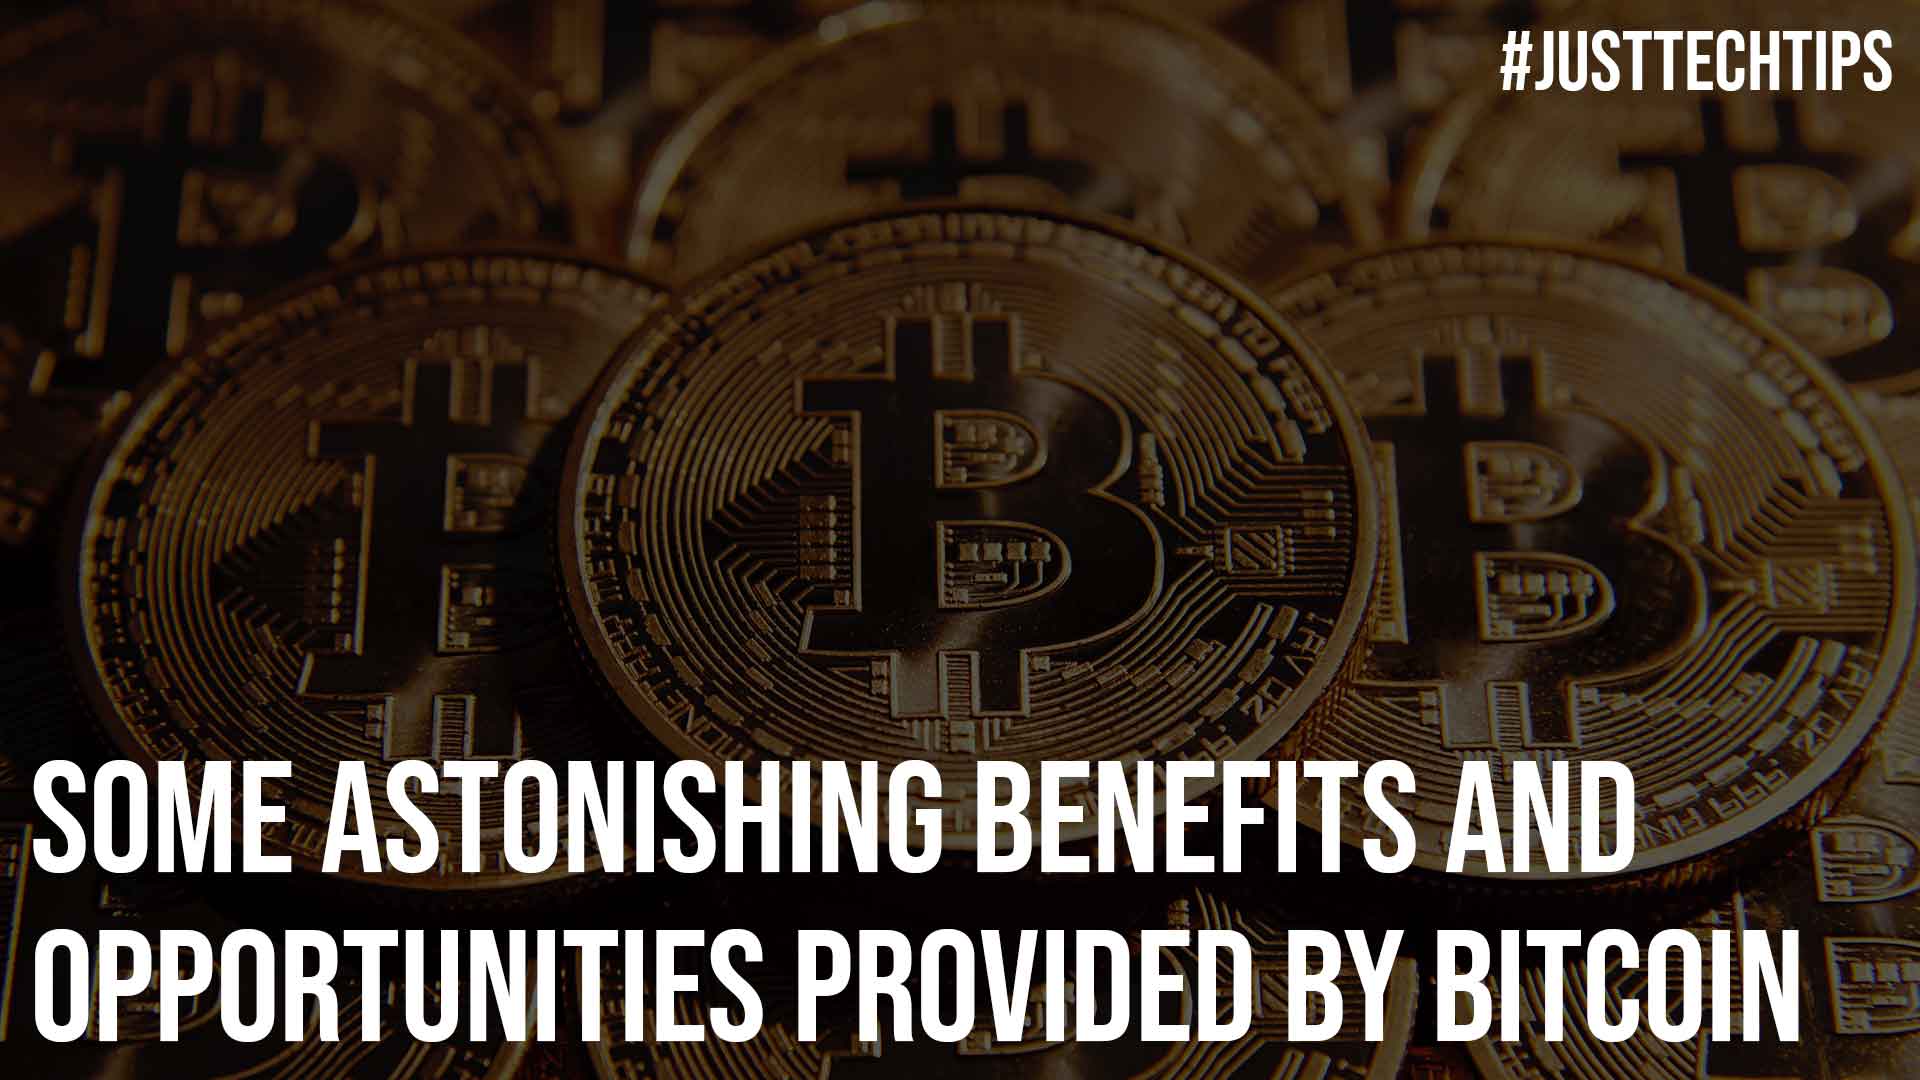 Some Astonishing Benefits and Opportunities Provided by Bitcoin